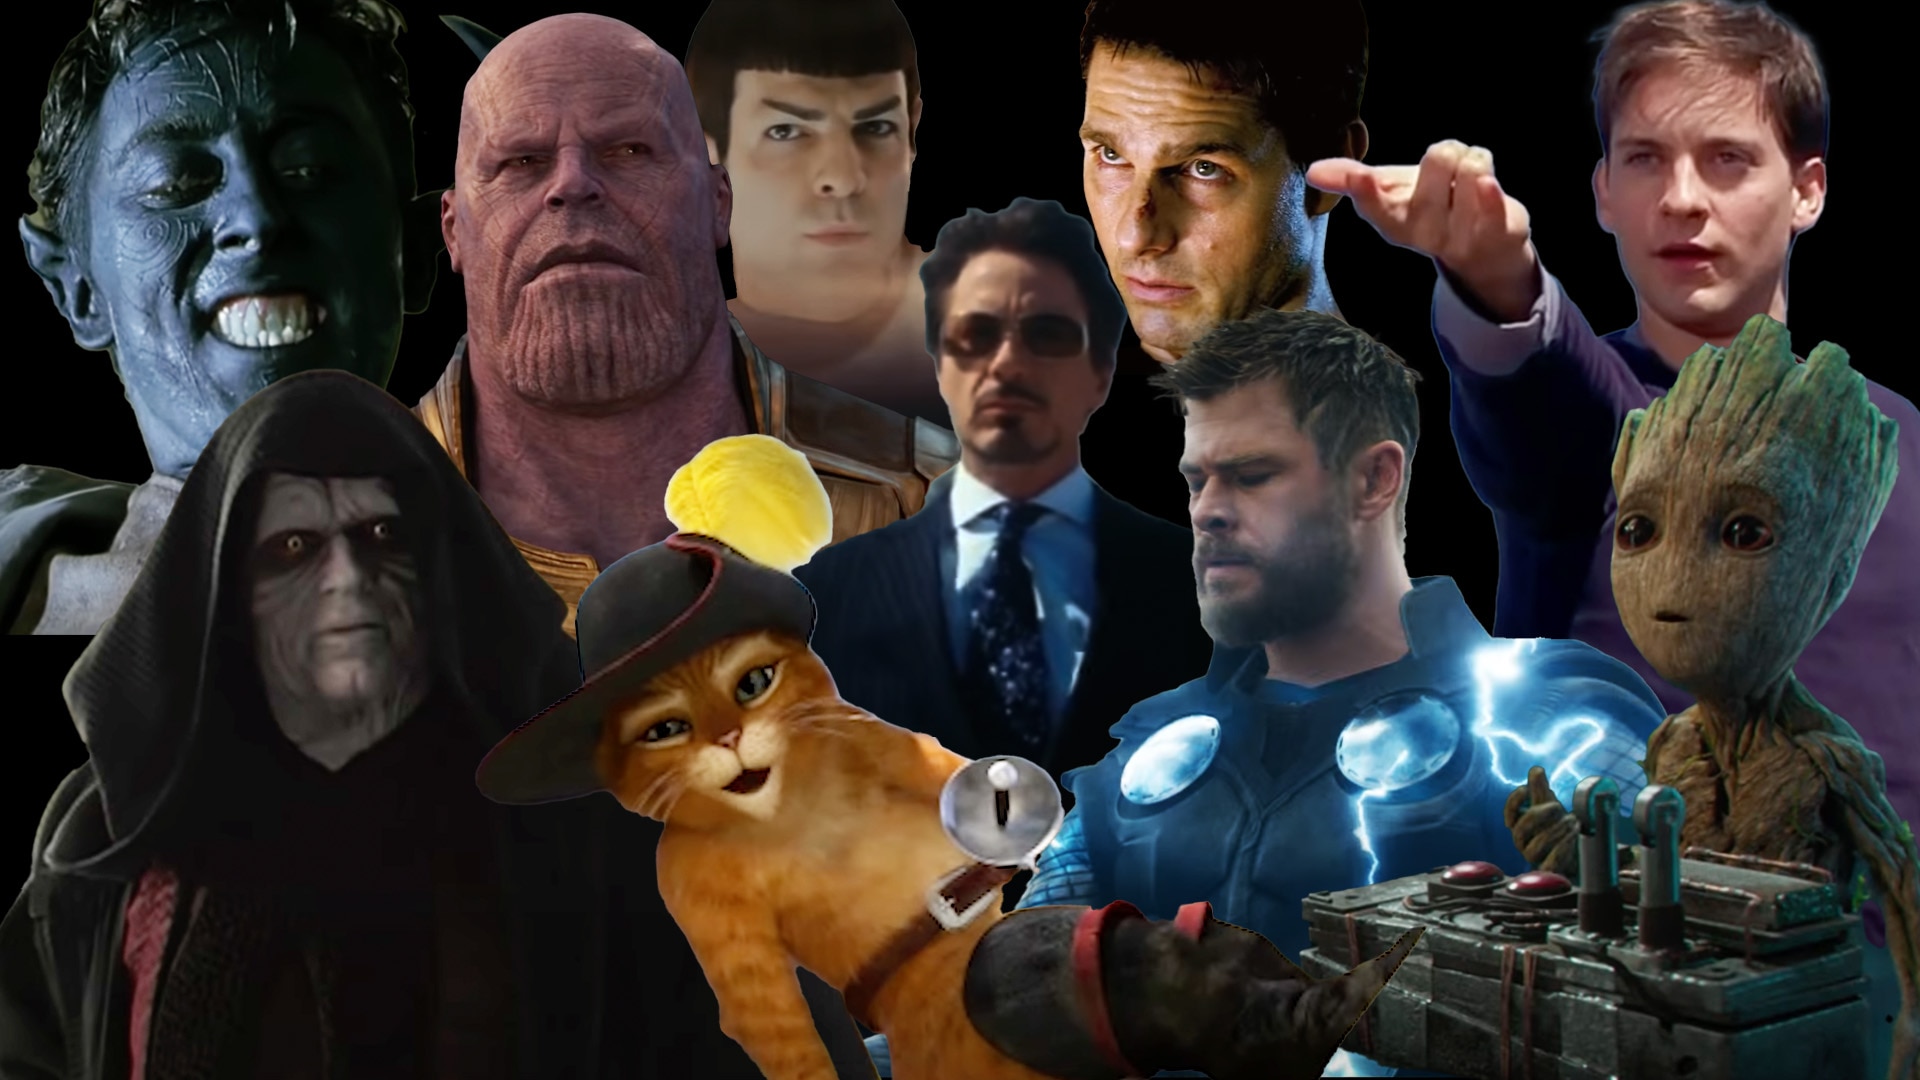 A collage including characters from Marvel, Star Trek, Star Wars, Mission Impossible, and Shrek.